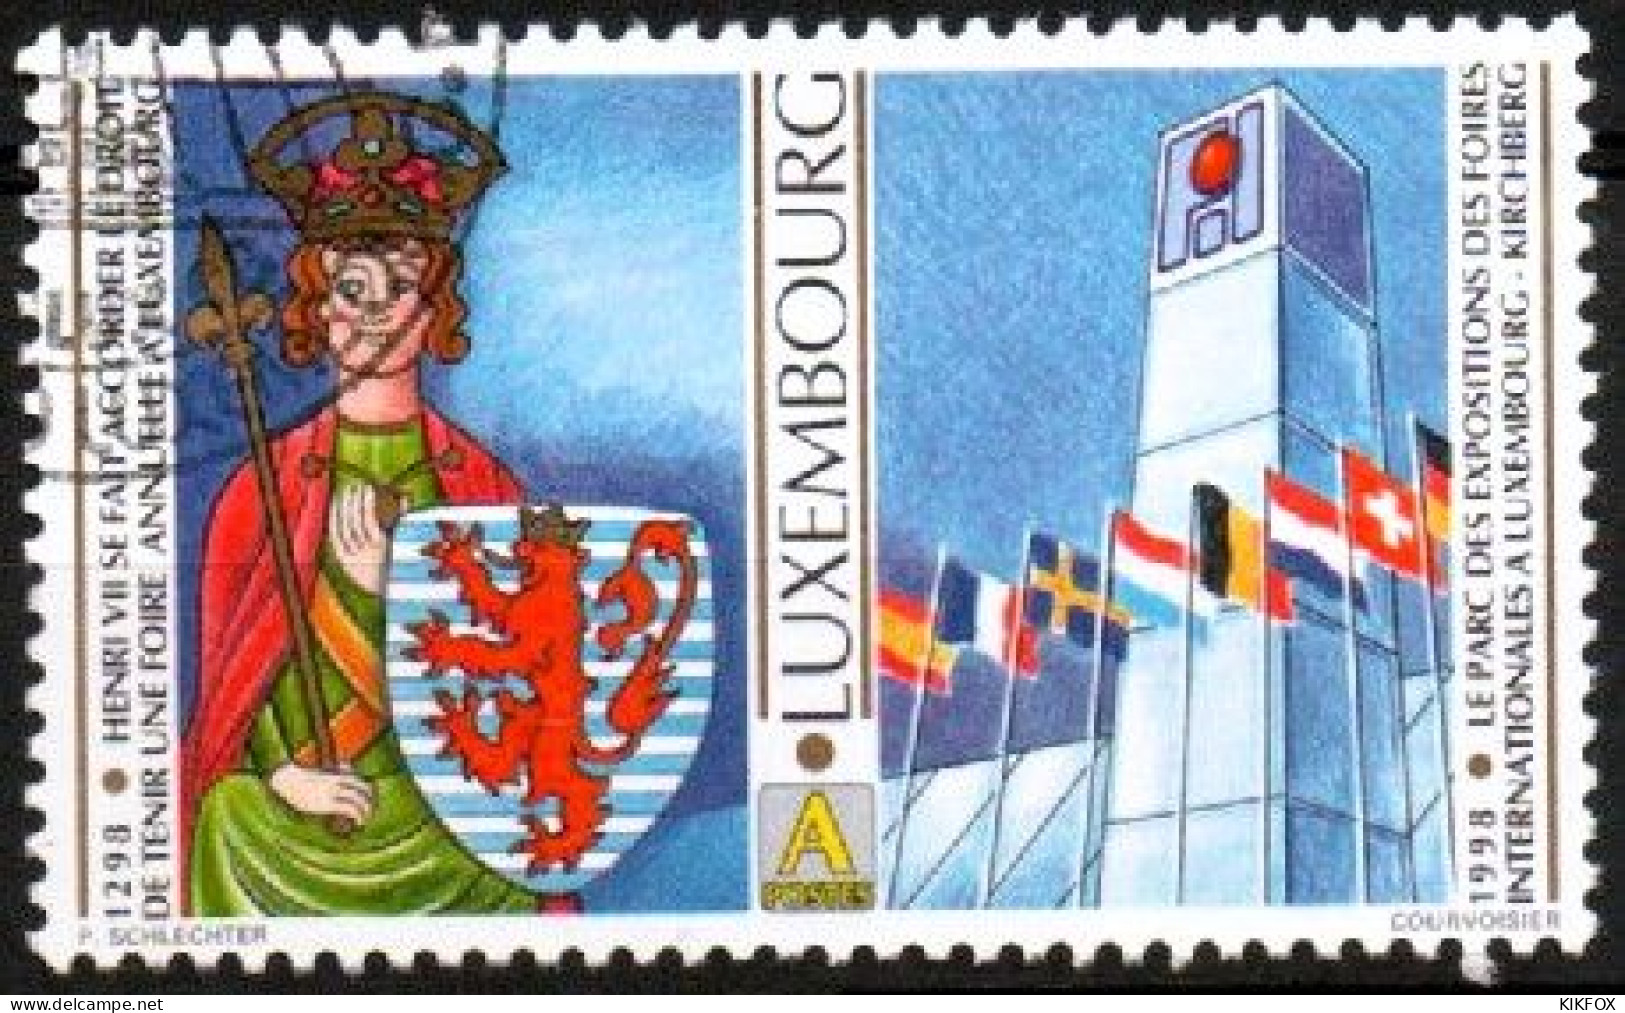 Luxembourg, Luxemburg, 1998, MI 1453  A, YT 1403 A, 700 JAHRE MESSEPRIVILEG,  GESTEMPELT,  OBLITERE - Used Stamps